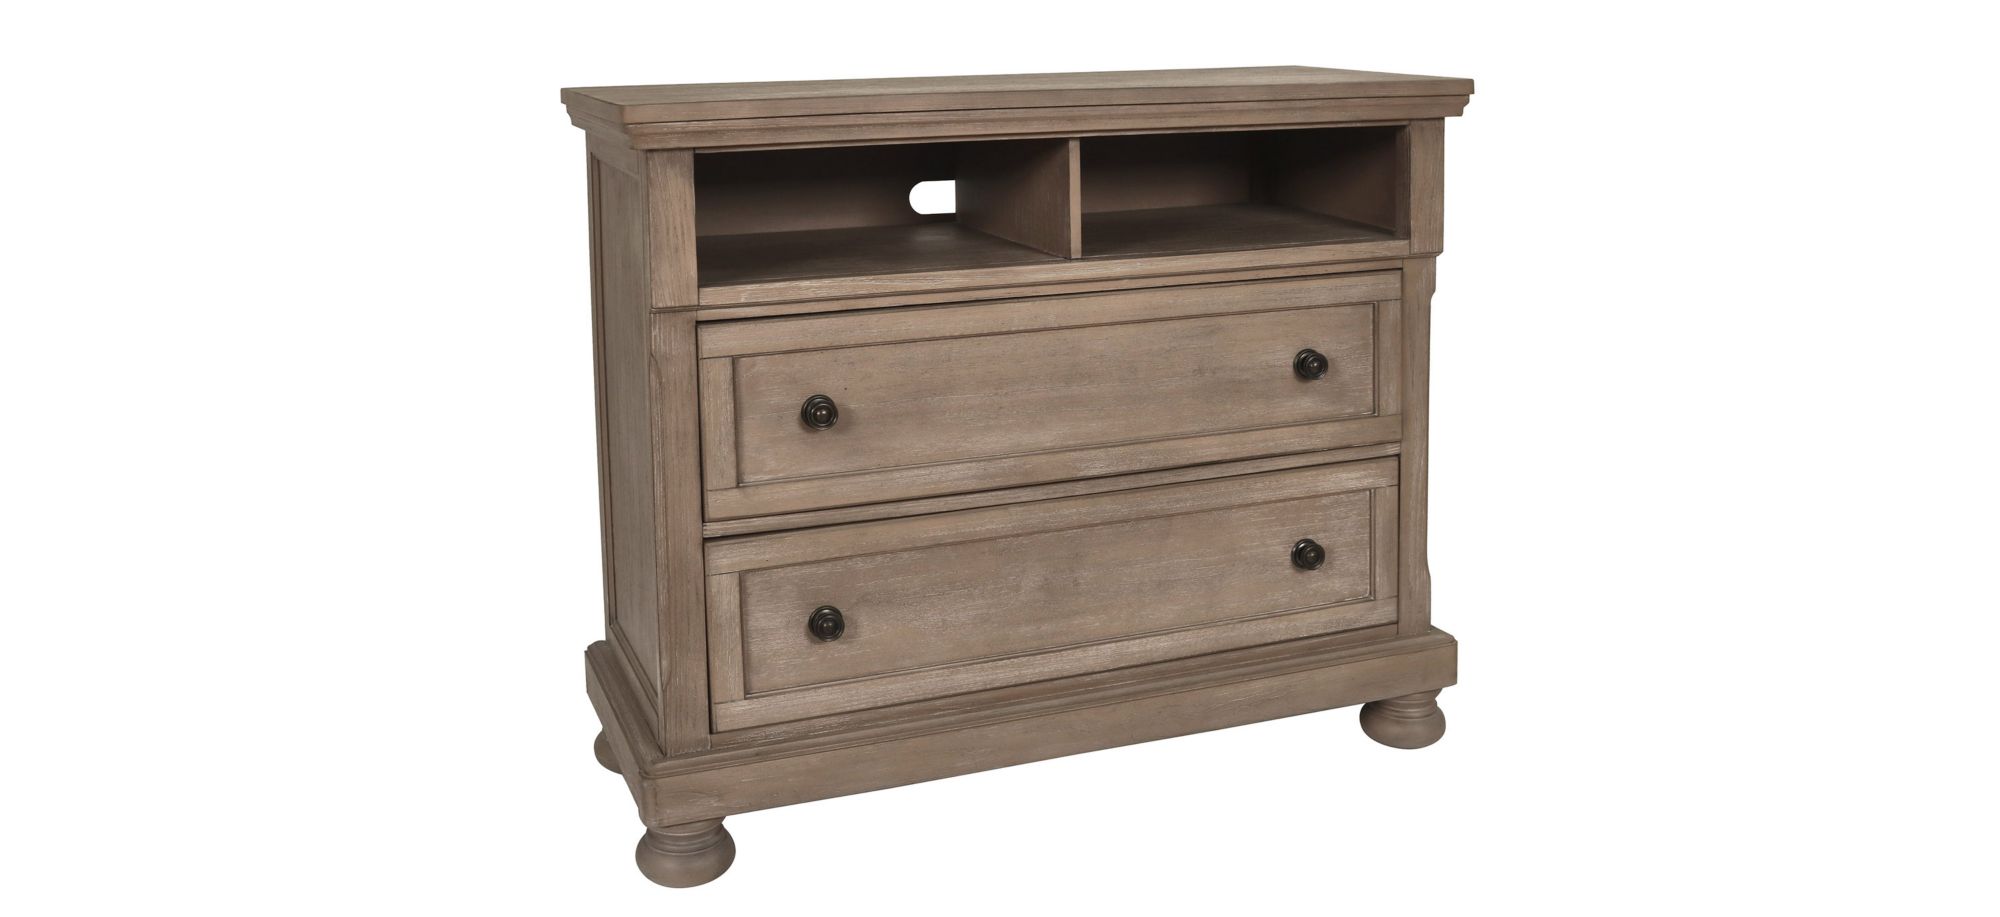 Allegra Media Chest in Pewter by New Classic Home Furnishings